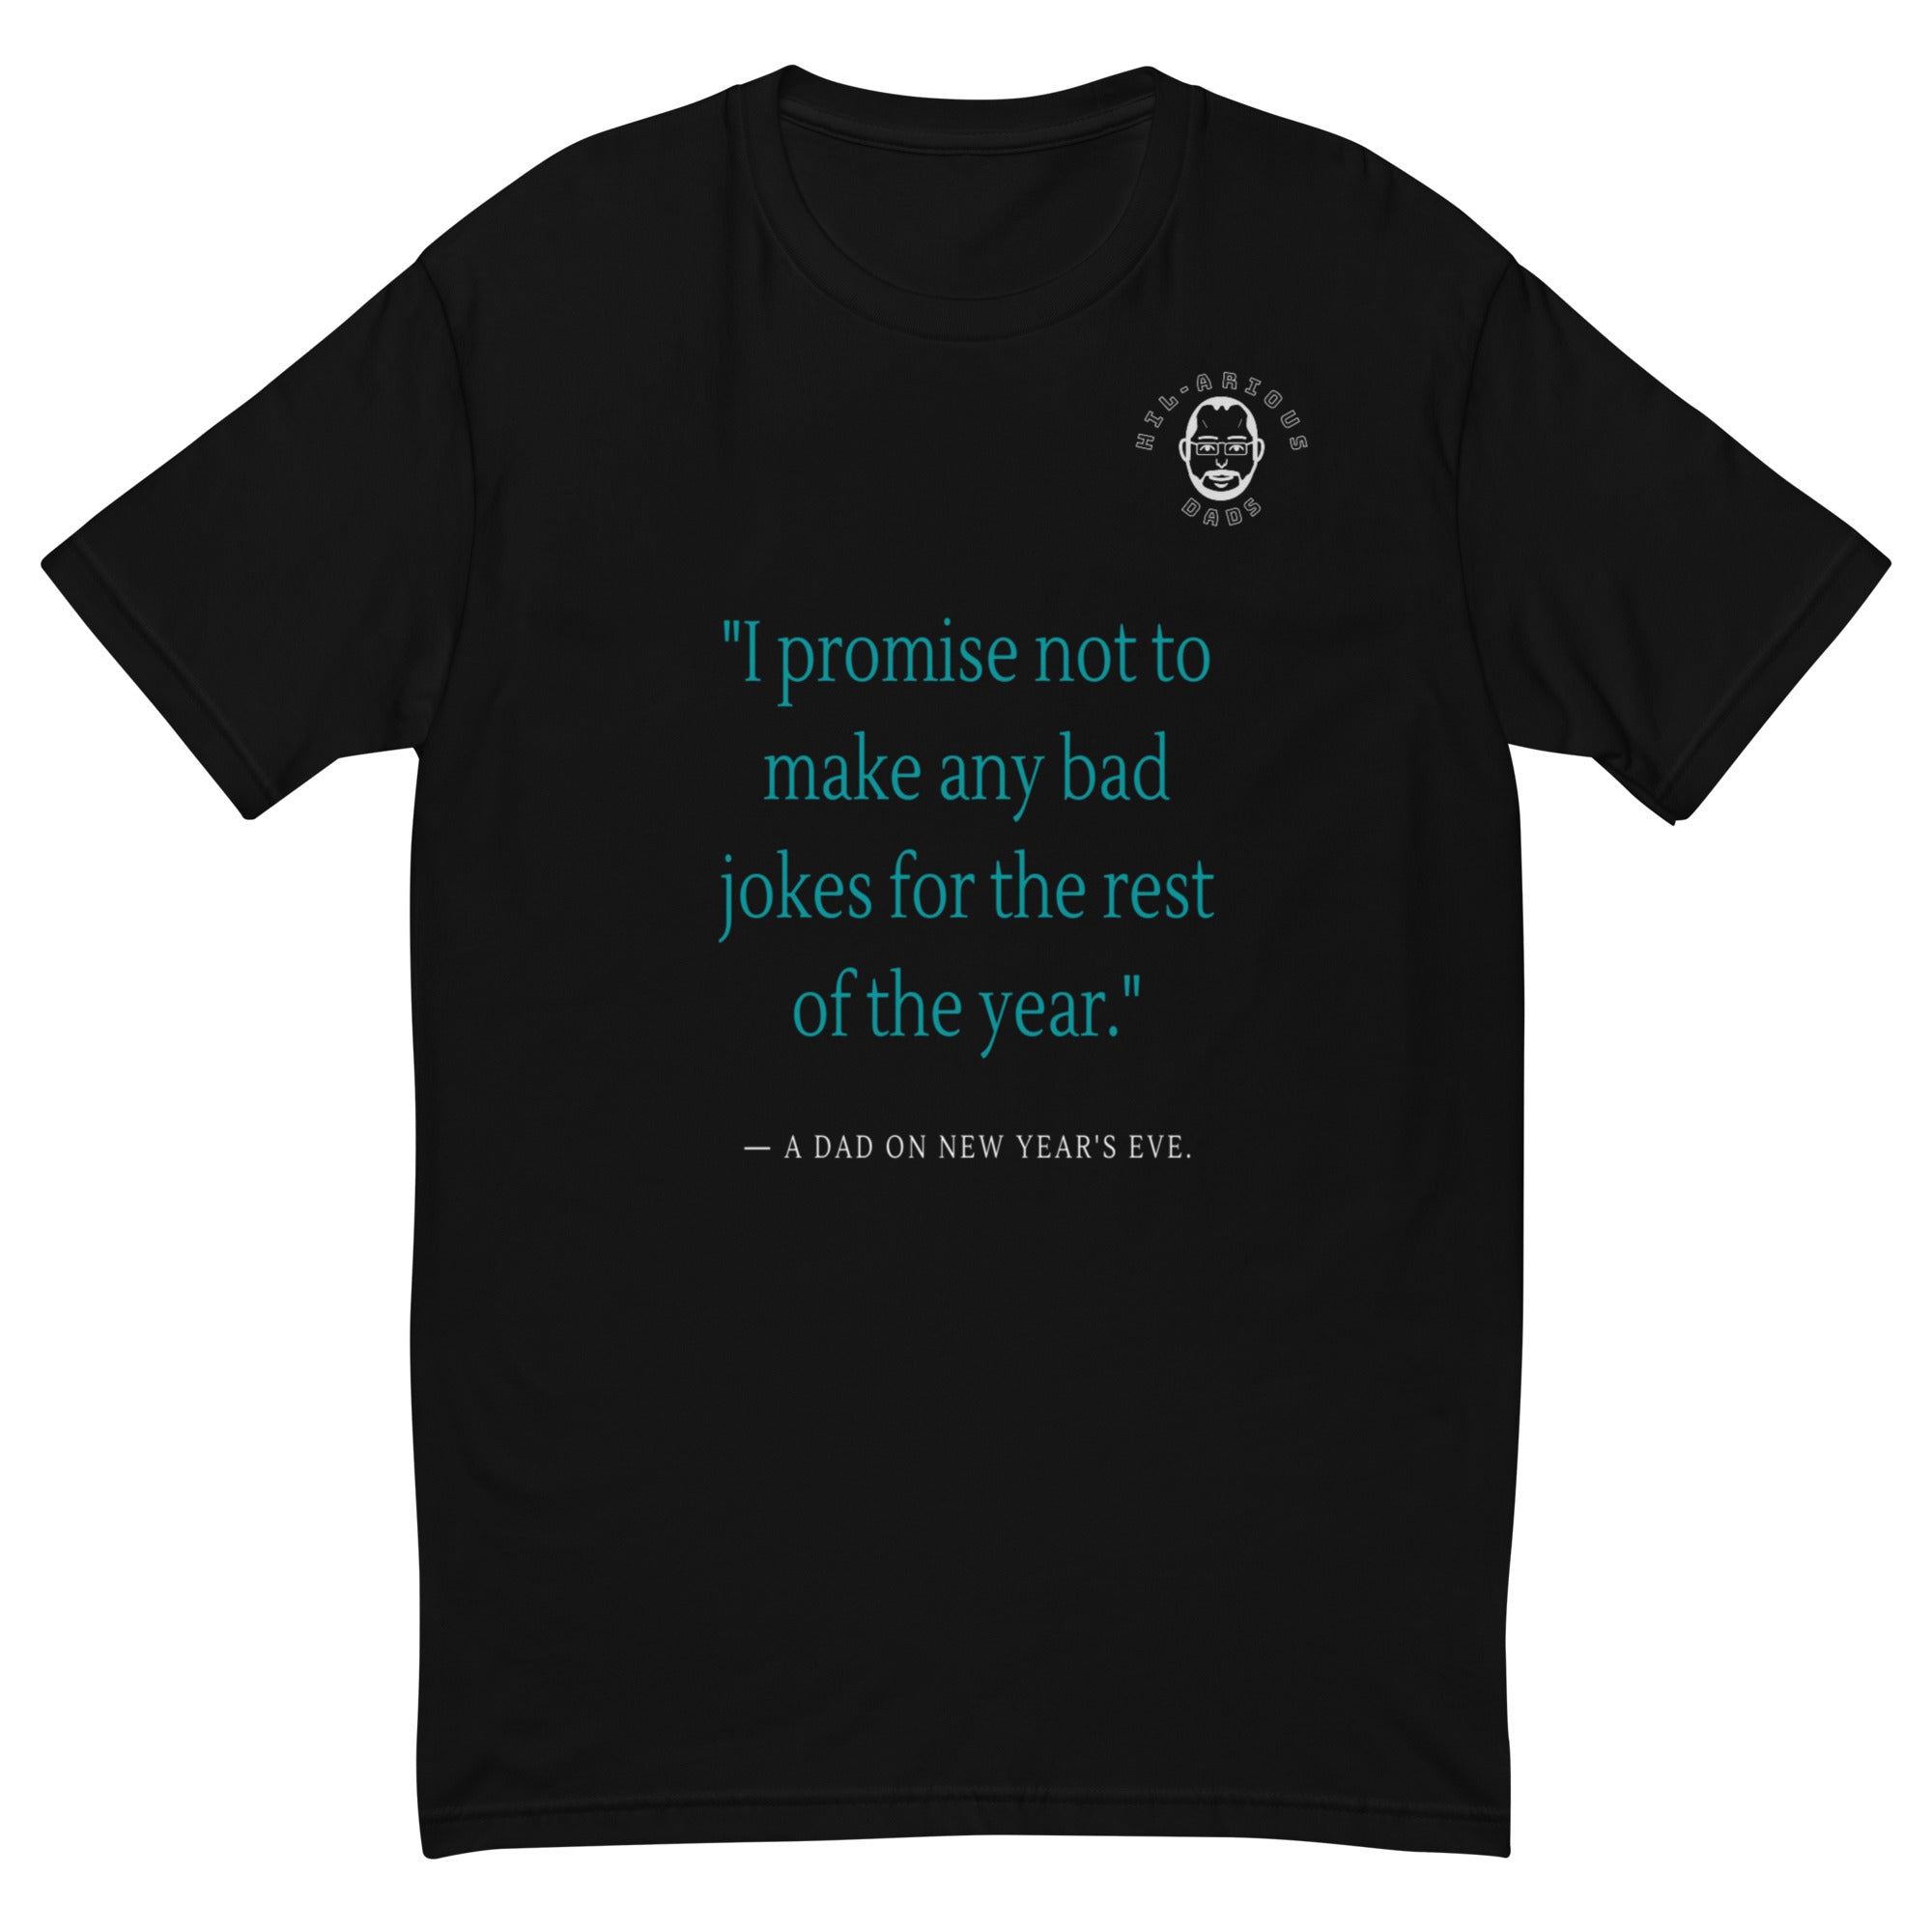 A dad's promise on New Year's Eve-T-shirt - Hil-arious Dads